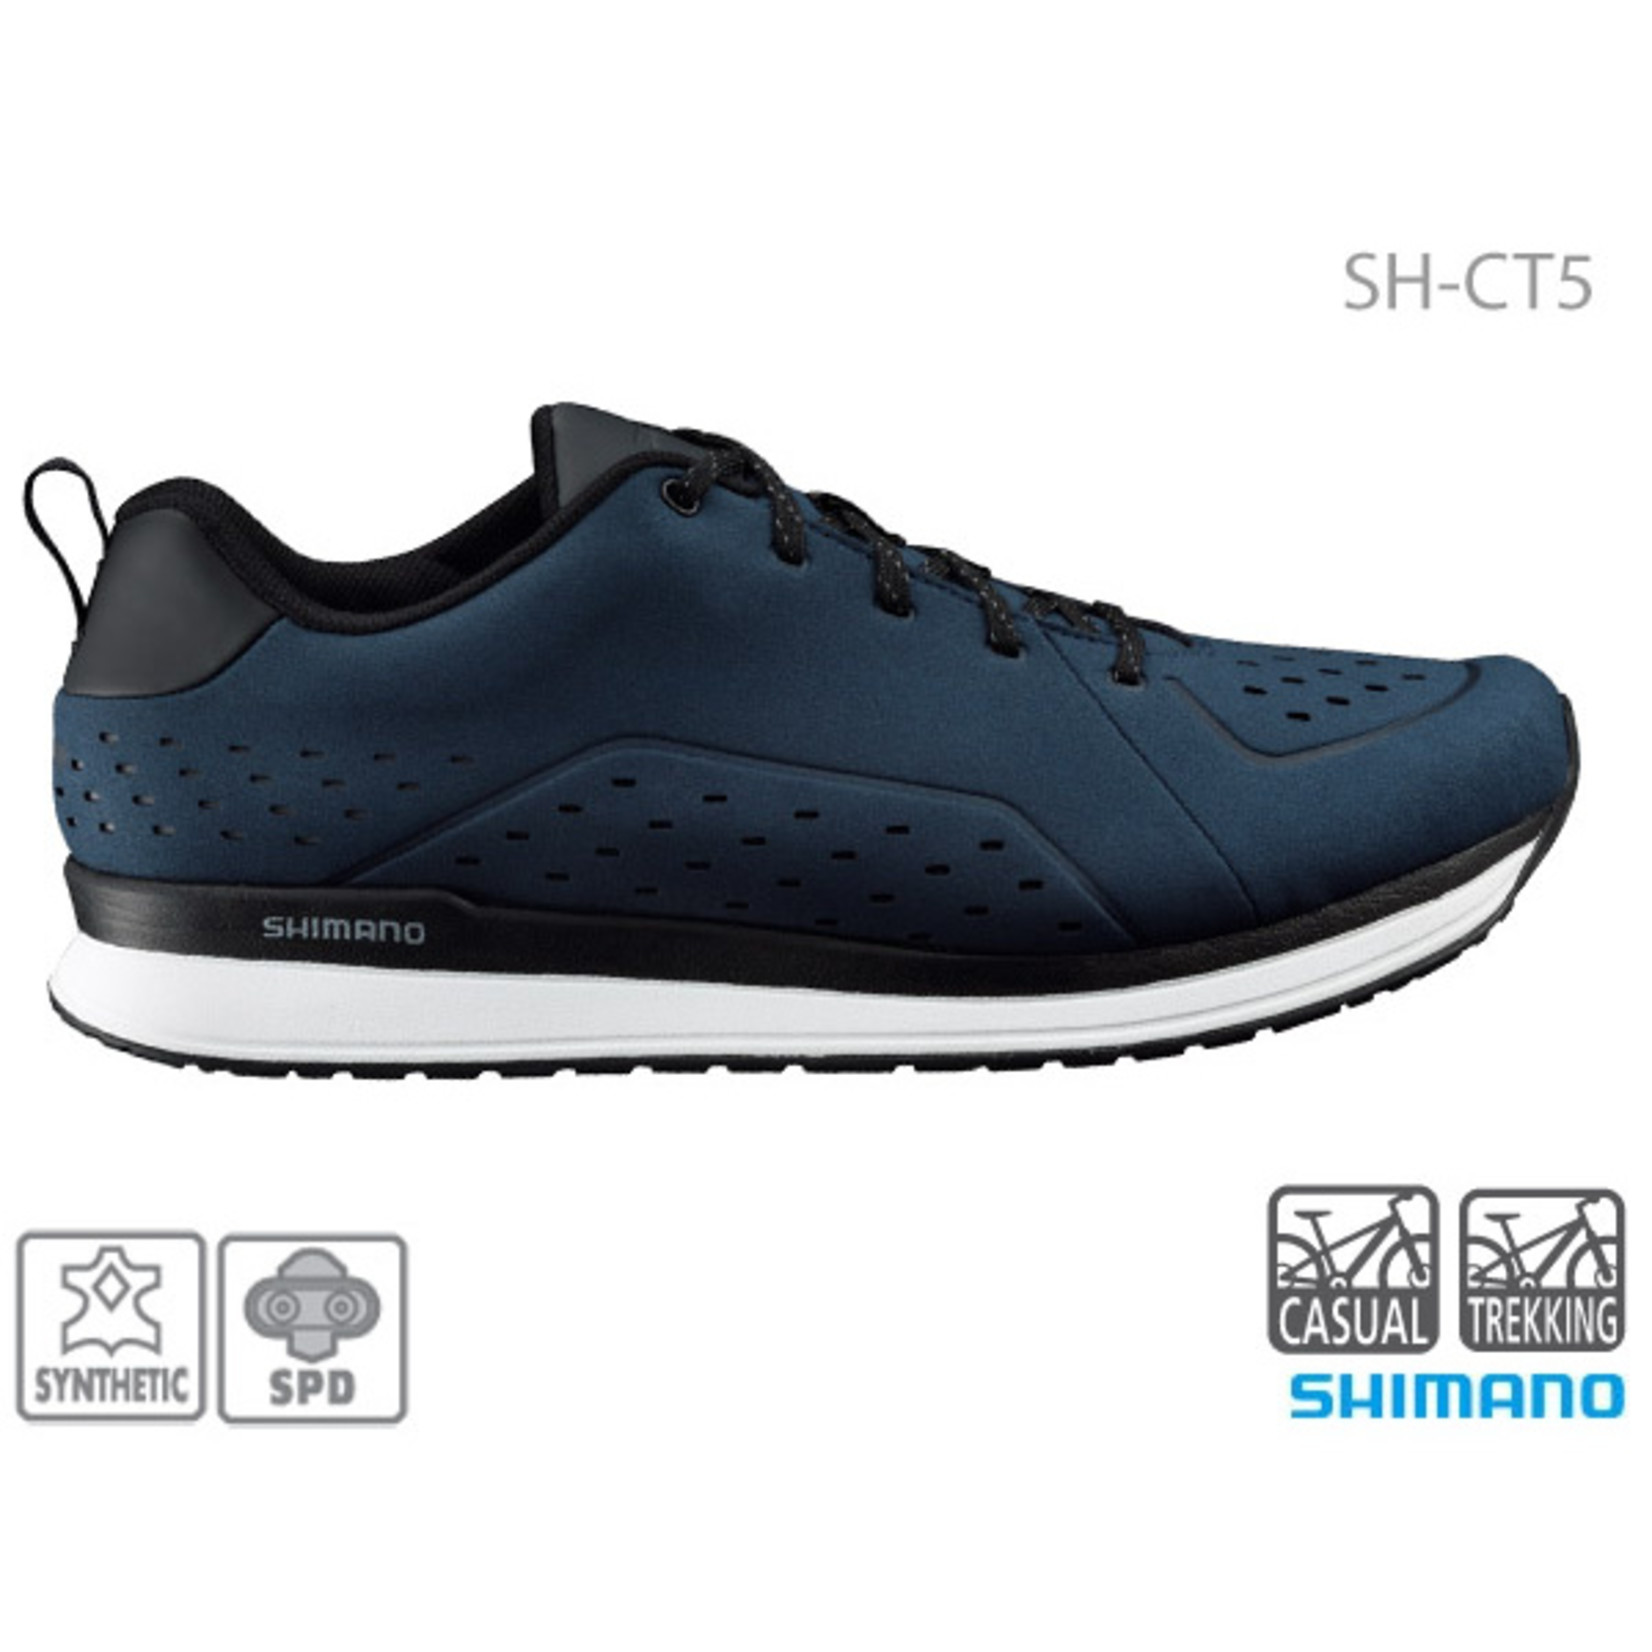 Shimano Shimano SH-CT500 SPD Comfort Shoes Synthetic- Black Easy Cleat Installation